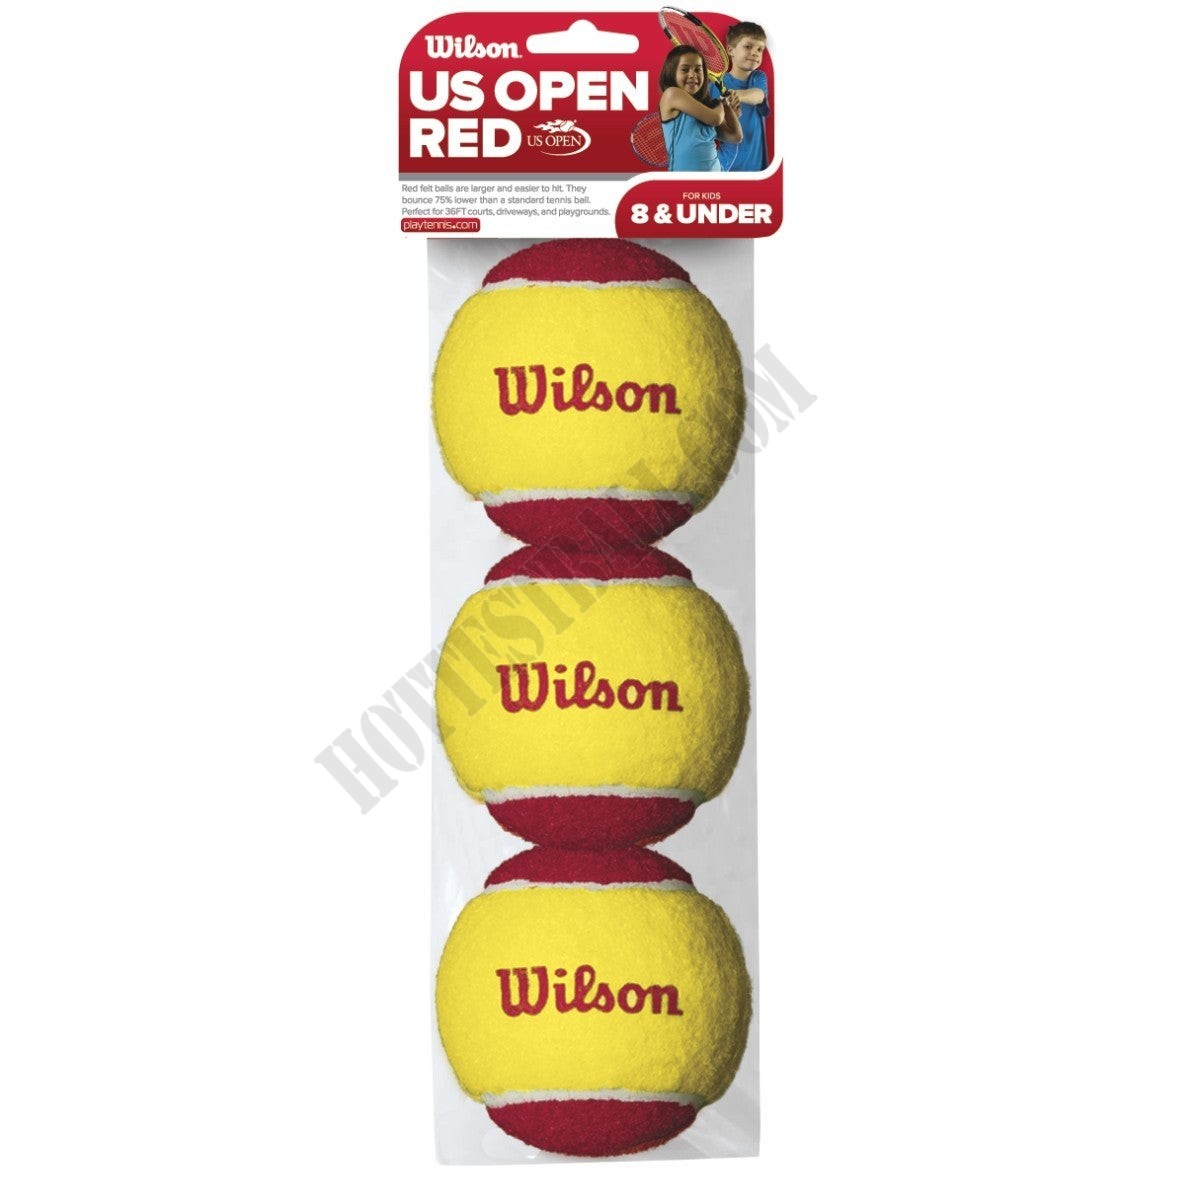 US Open Red Tournament Transition Tennis Balls (Ages 8 & Under) - Wilson Discount Store - US Open Red Tournament Transition Tennis Balls (Ages 8 & Under) - Wilson Discount Store